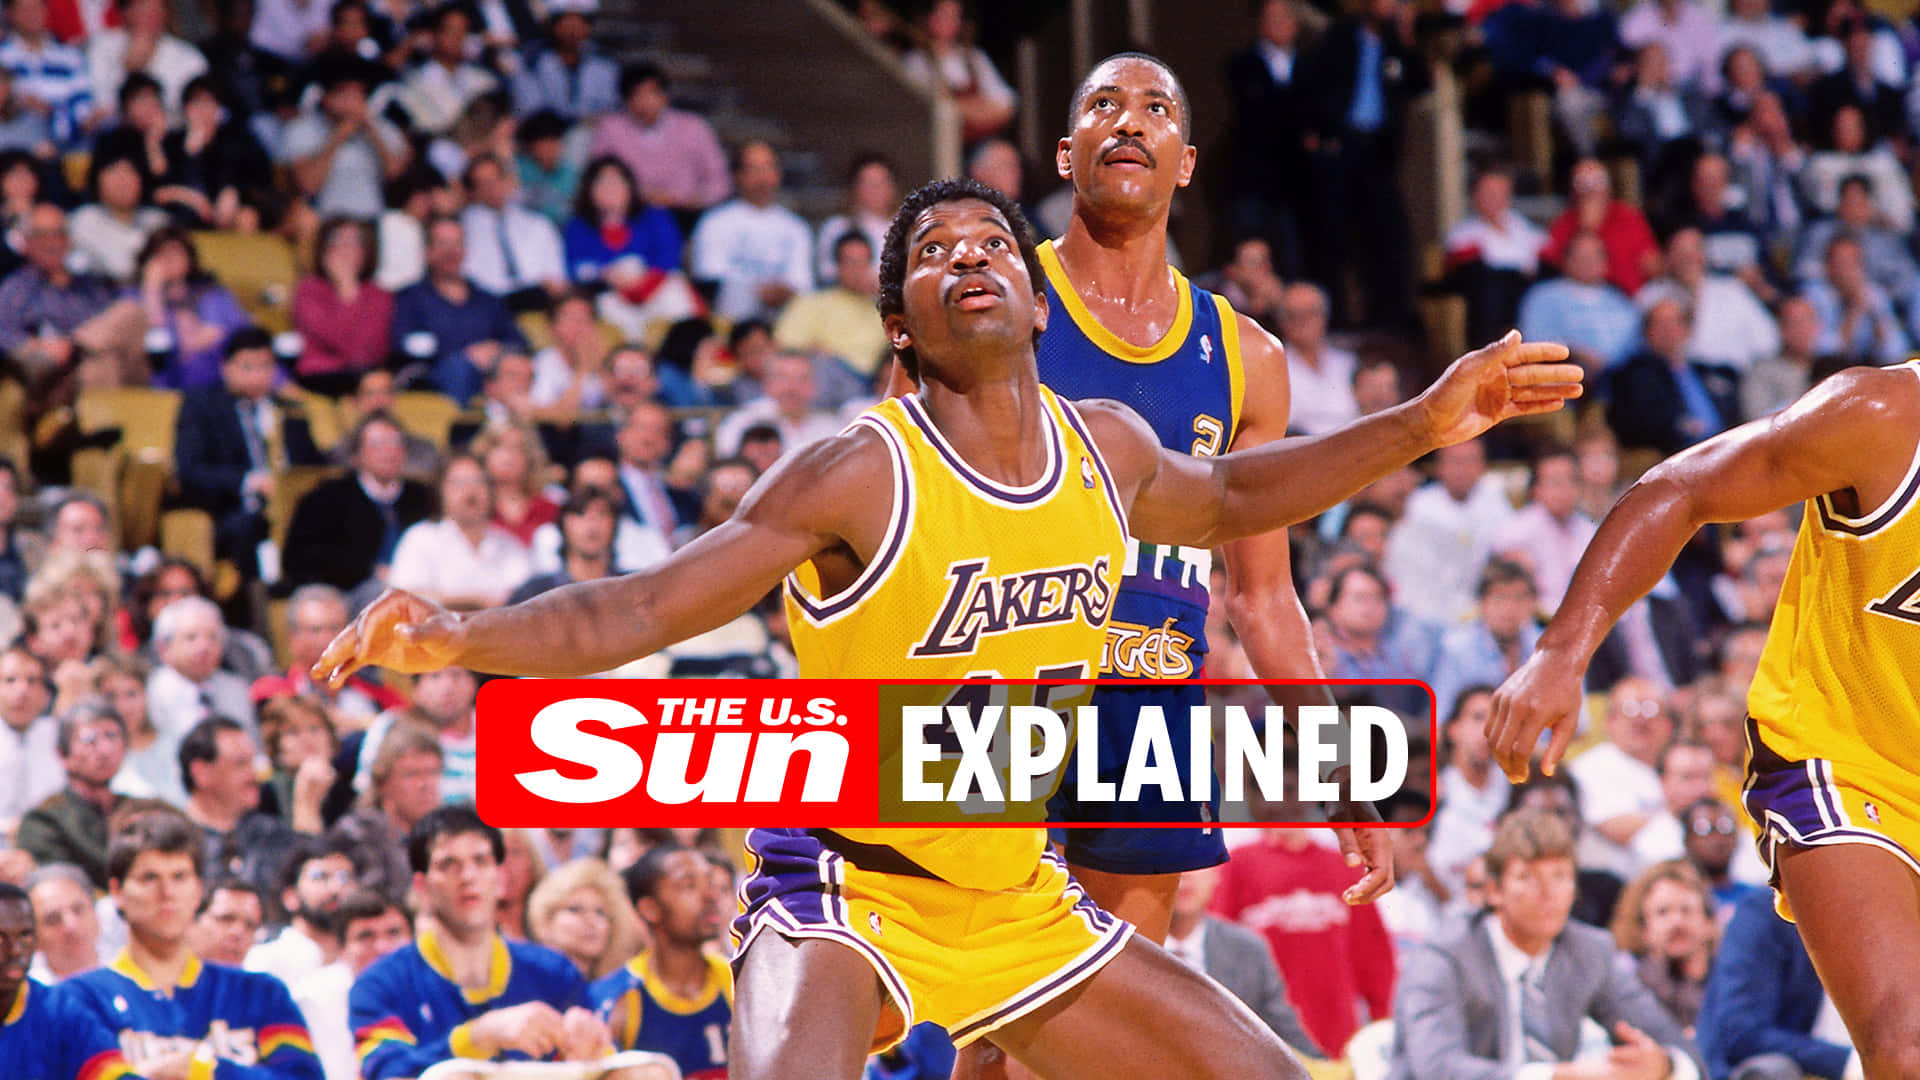 Alex English Against A.c. Green Lakers Vs. Nuggets Wallpaper